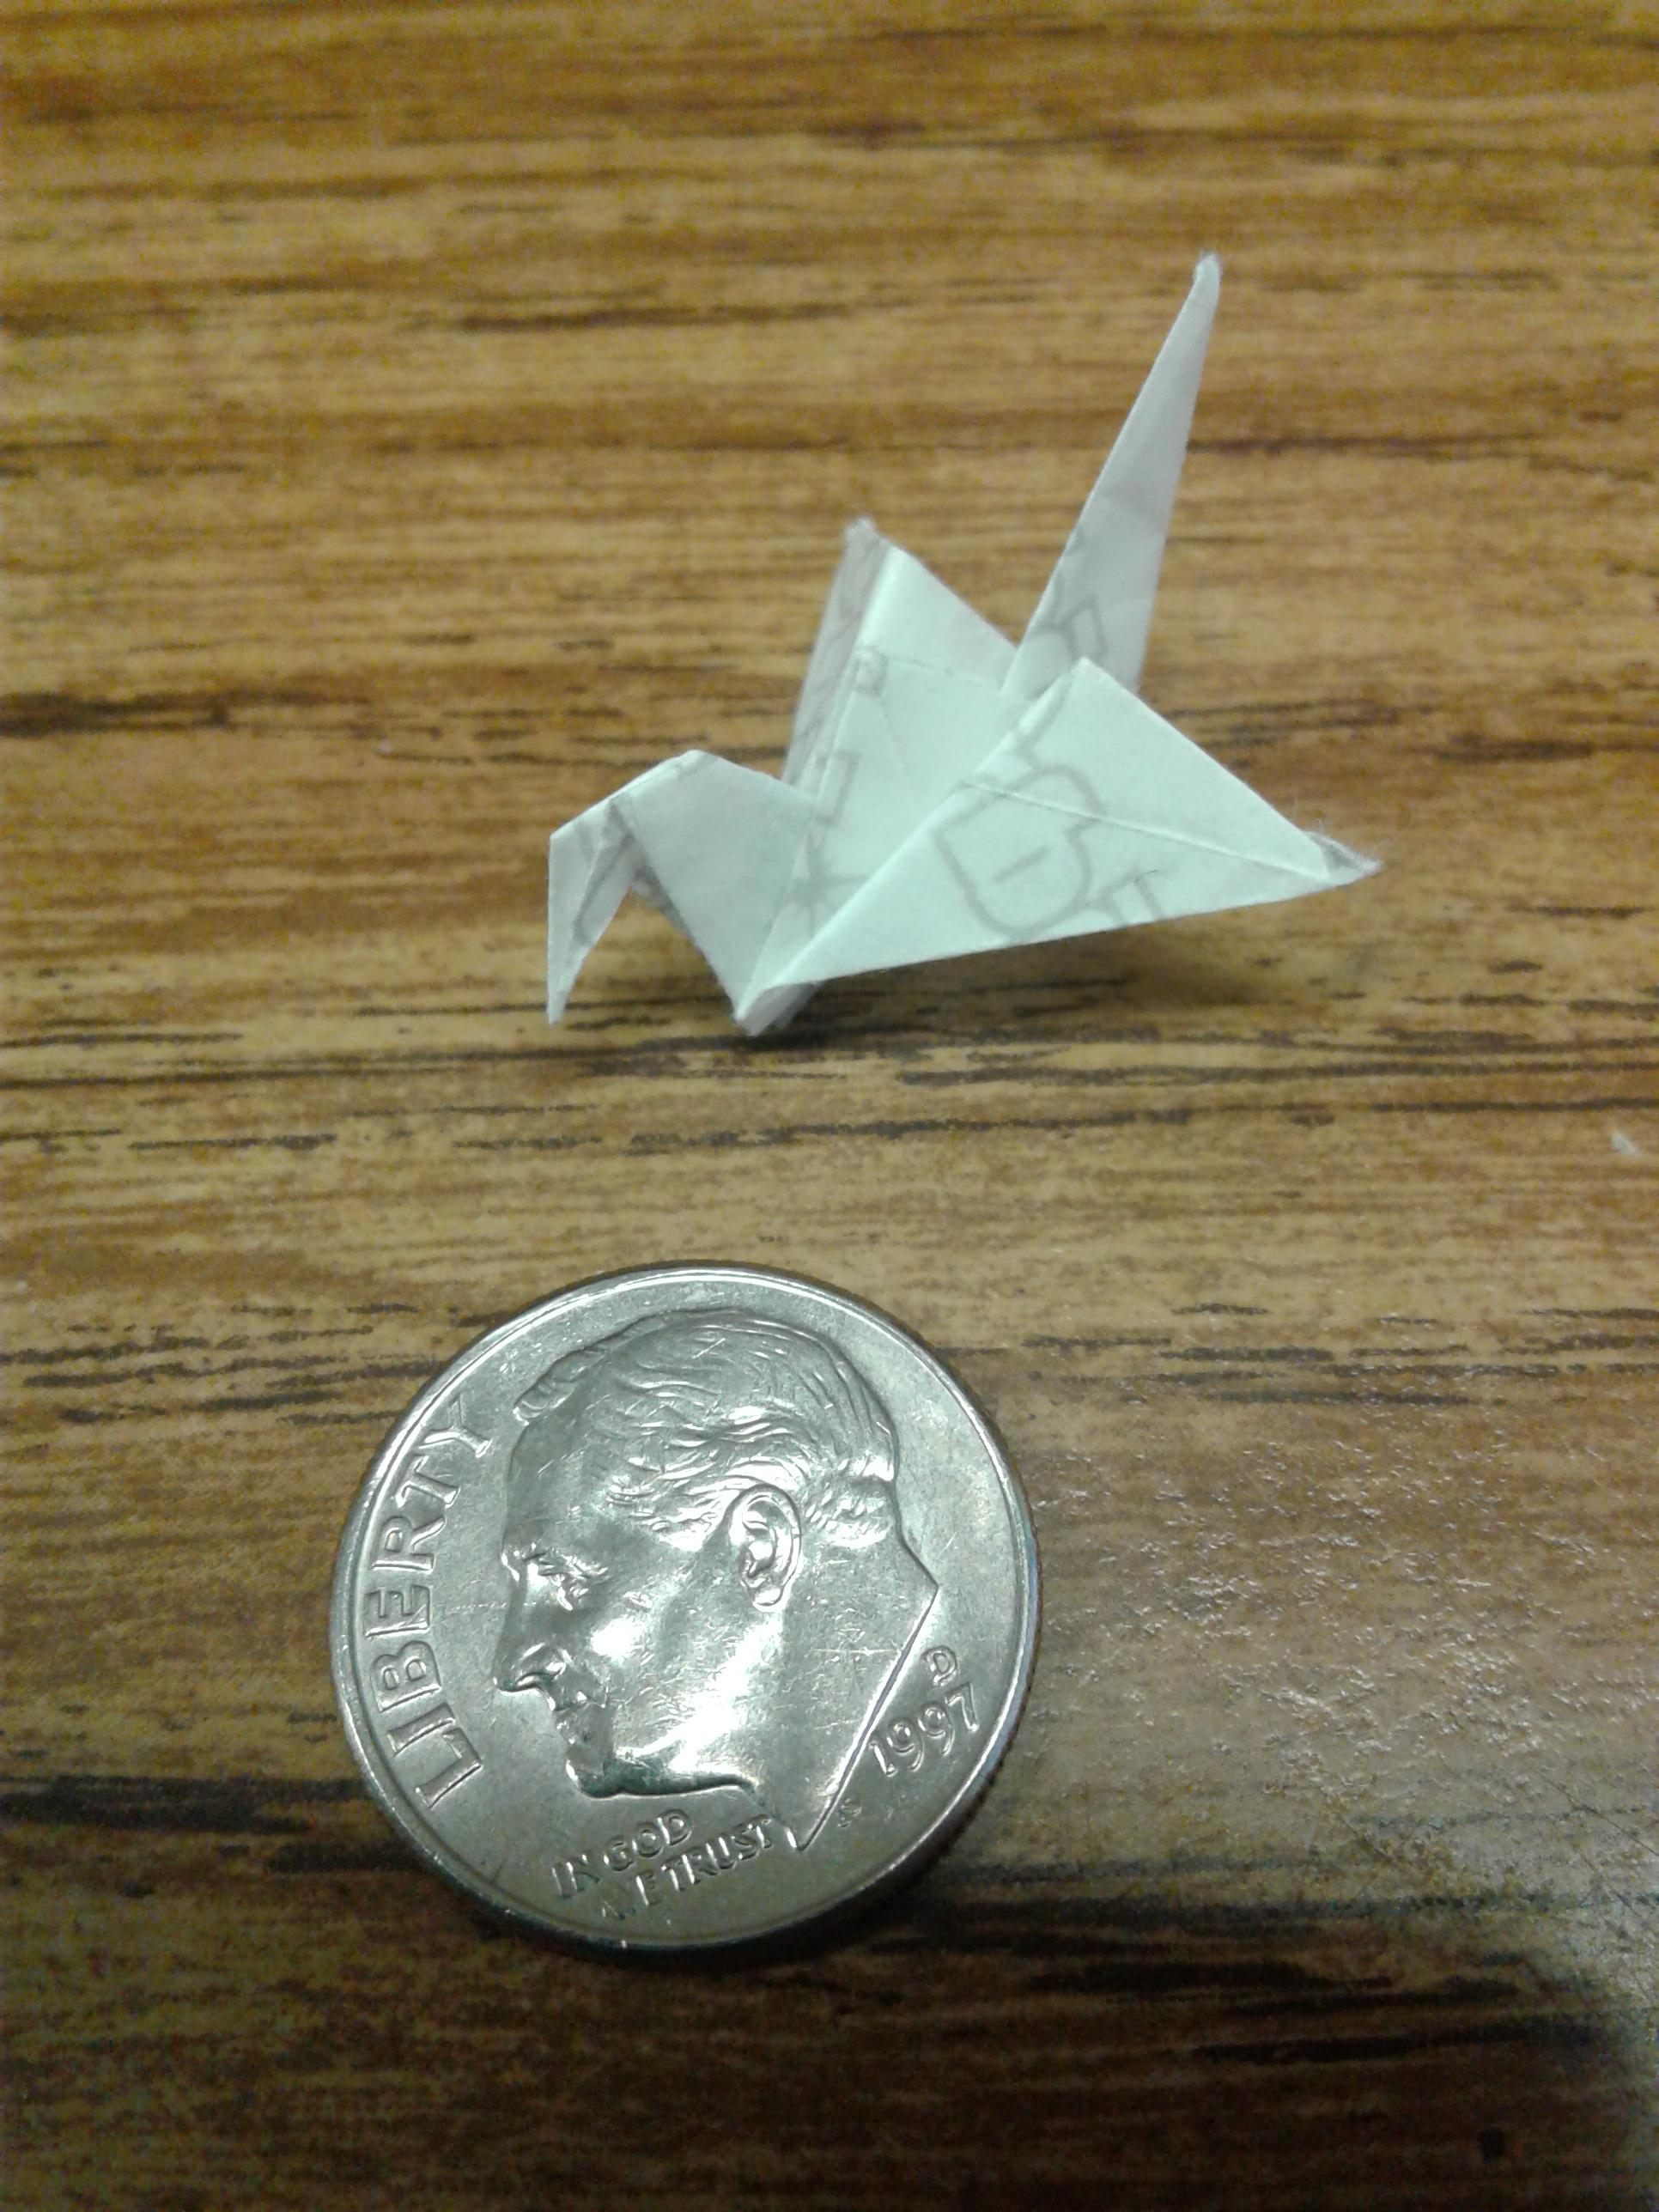 Origami From Gum Wrapper This Origami Crane Made Of An Orbit Gum Wrapper Oddlysatisfying